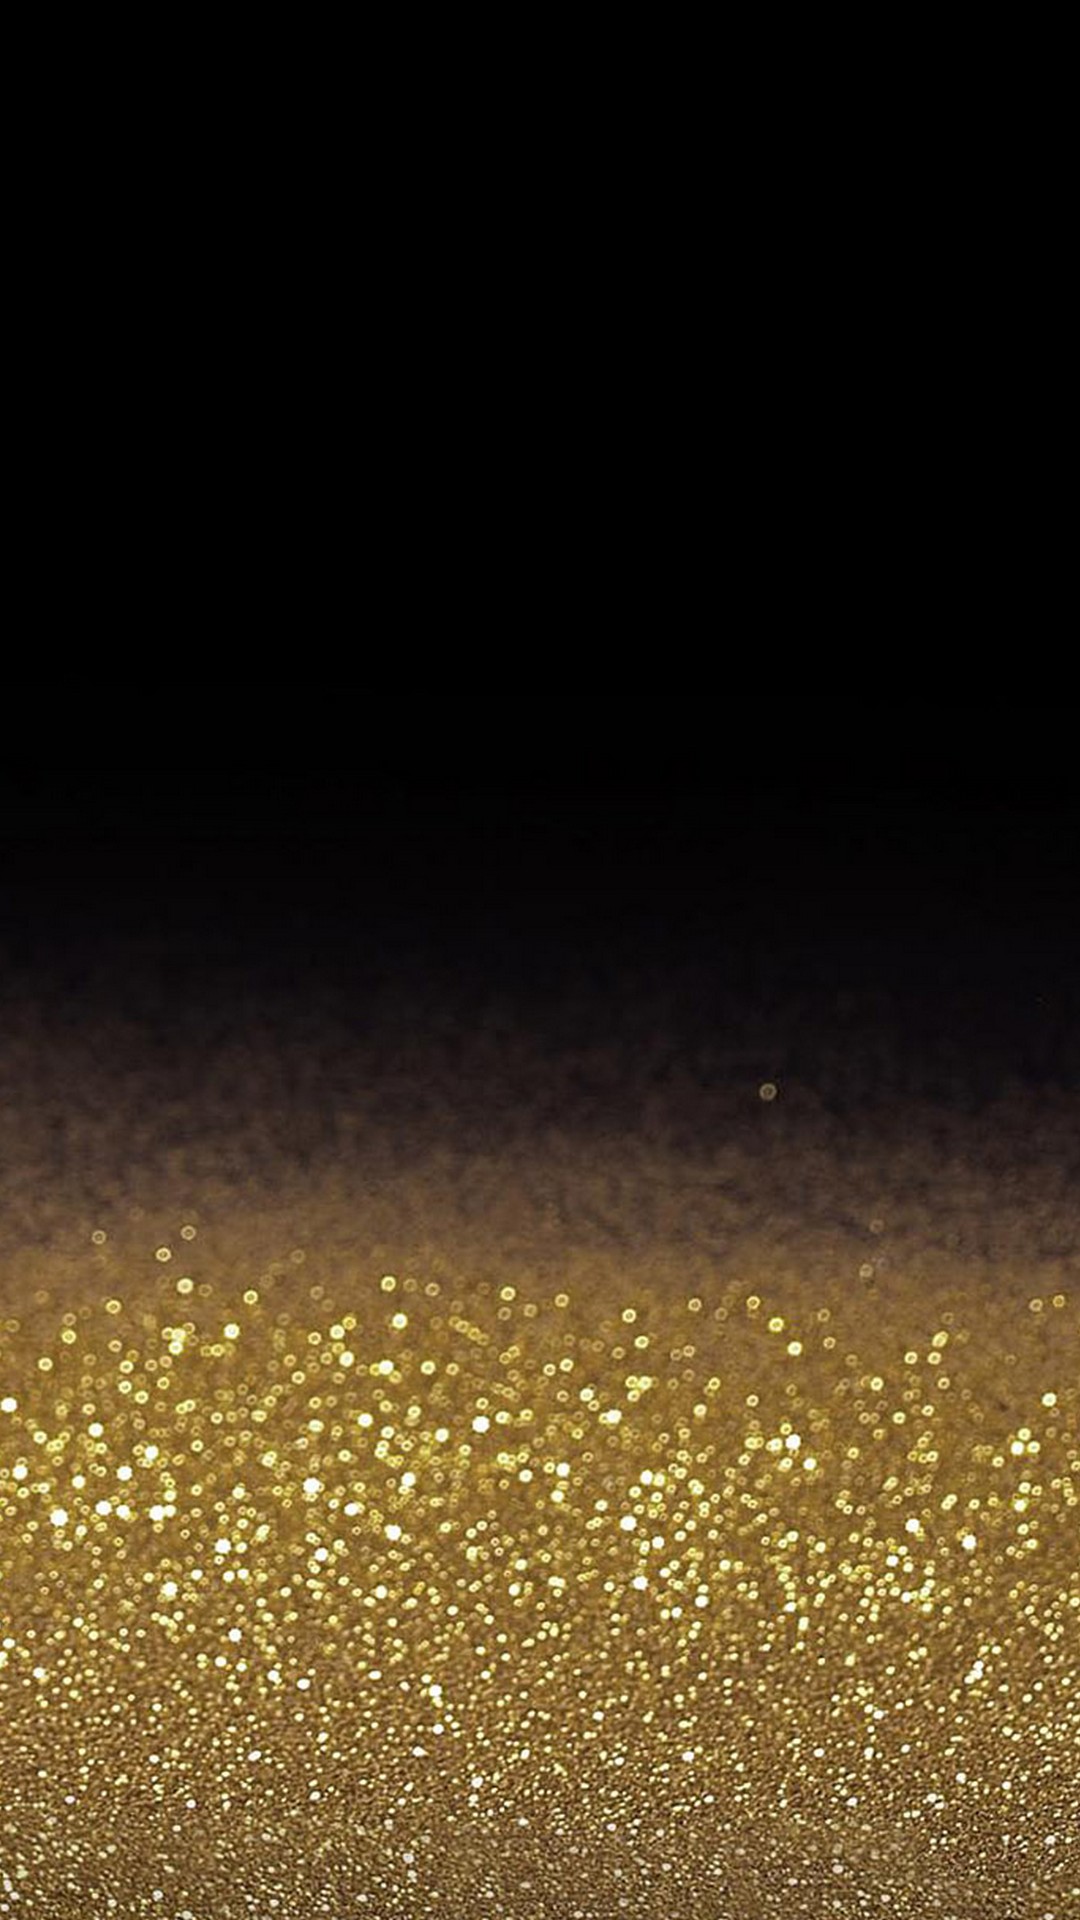 Android Wallpaper Gold Glitter With Hd Resolution - Black And Gold Hd - HD Wallpaper 